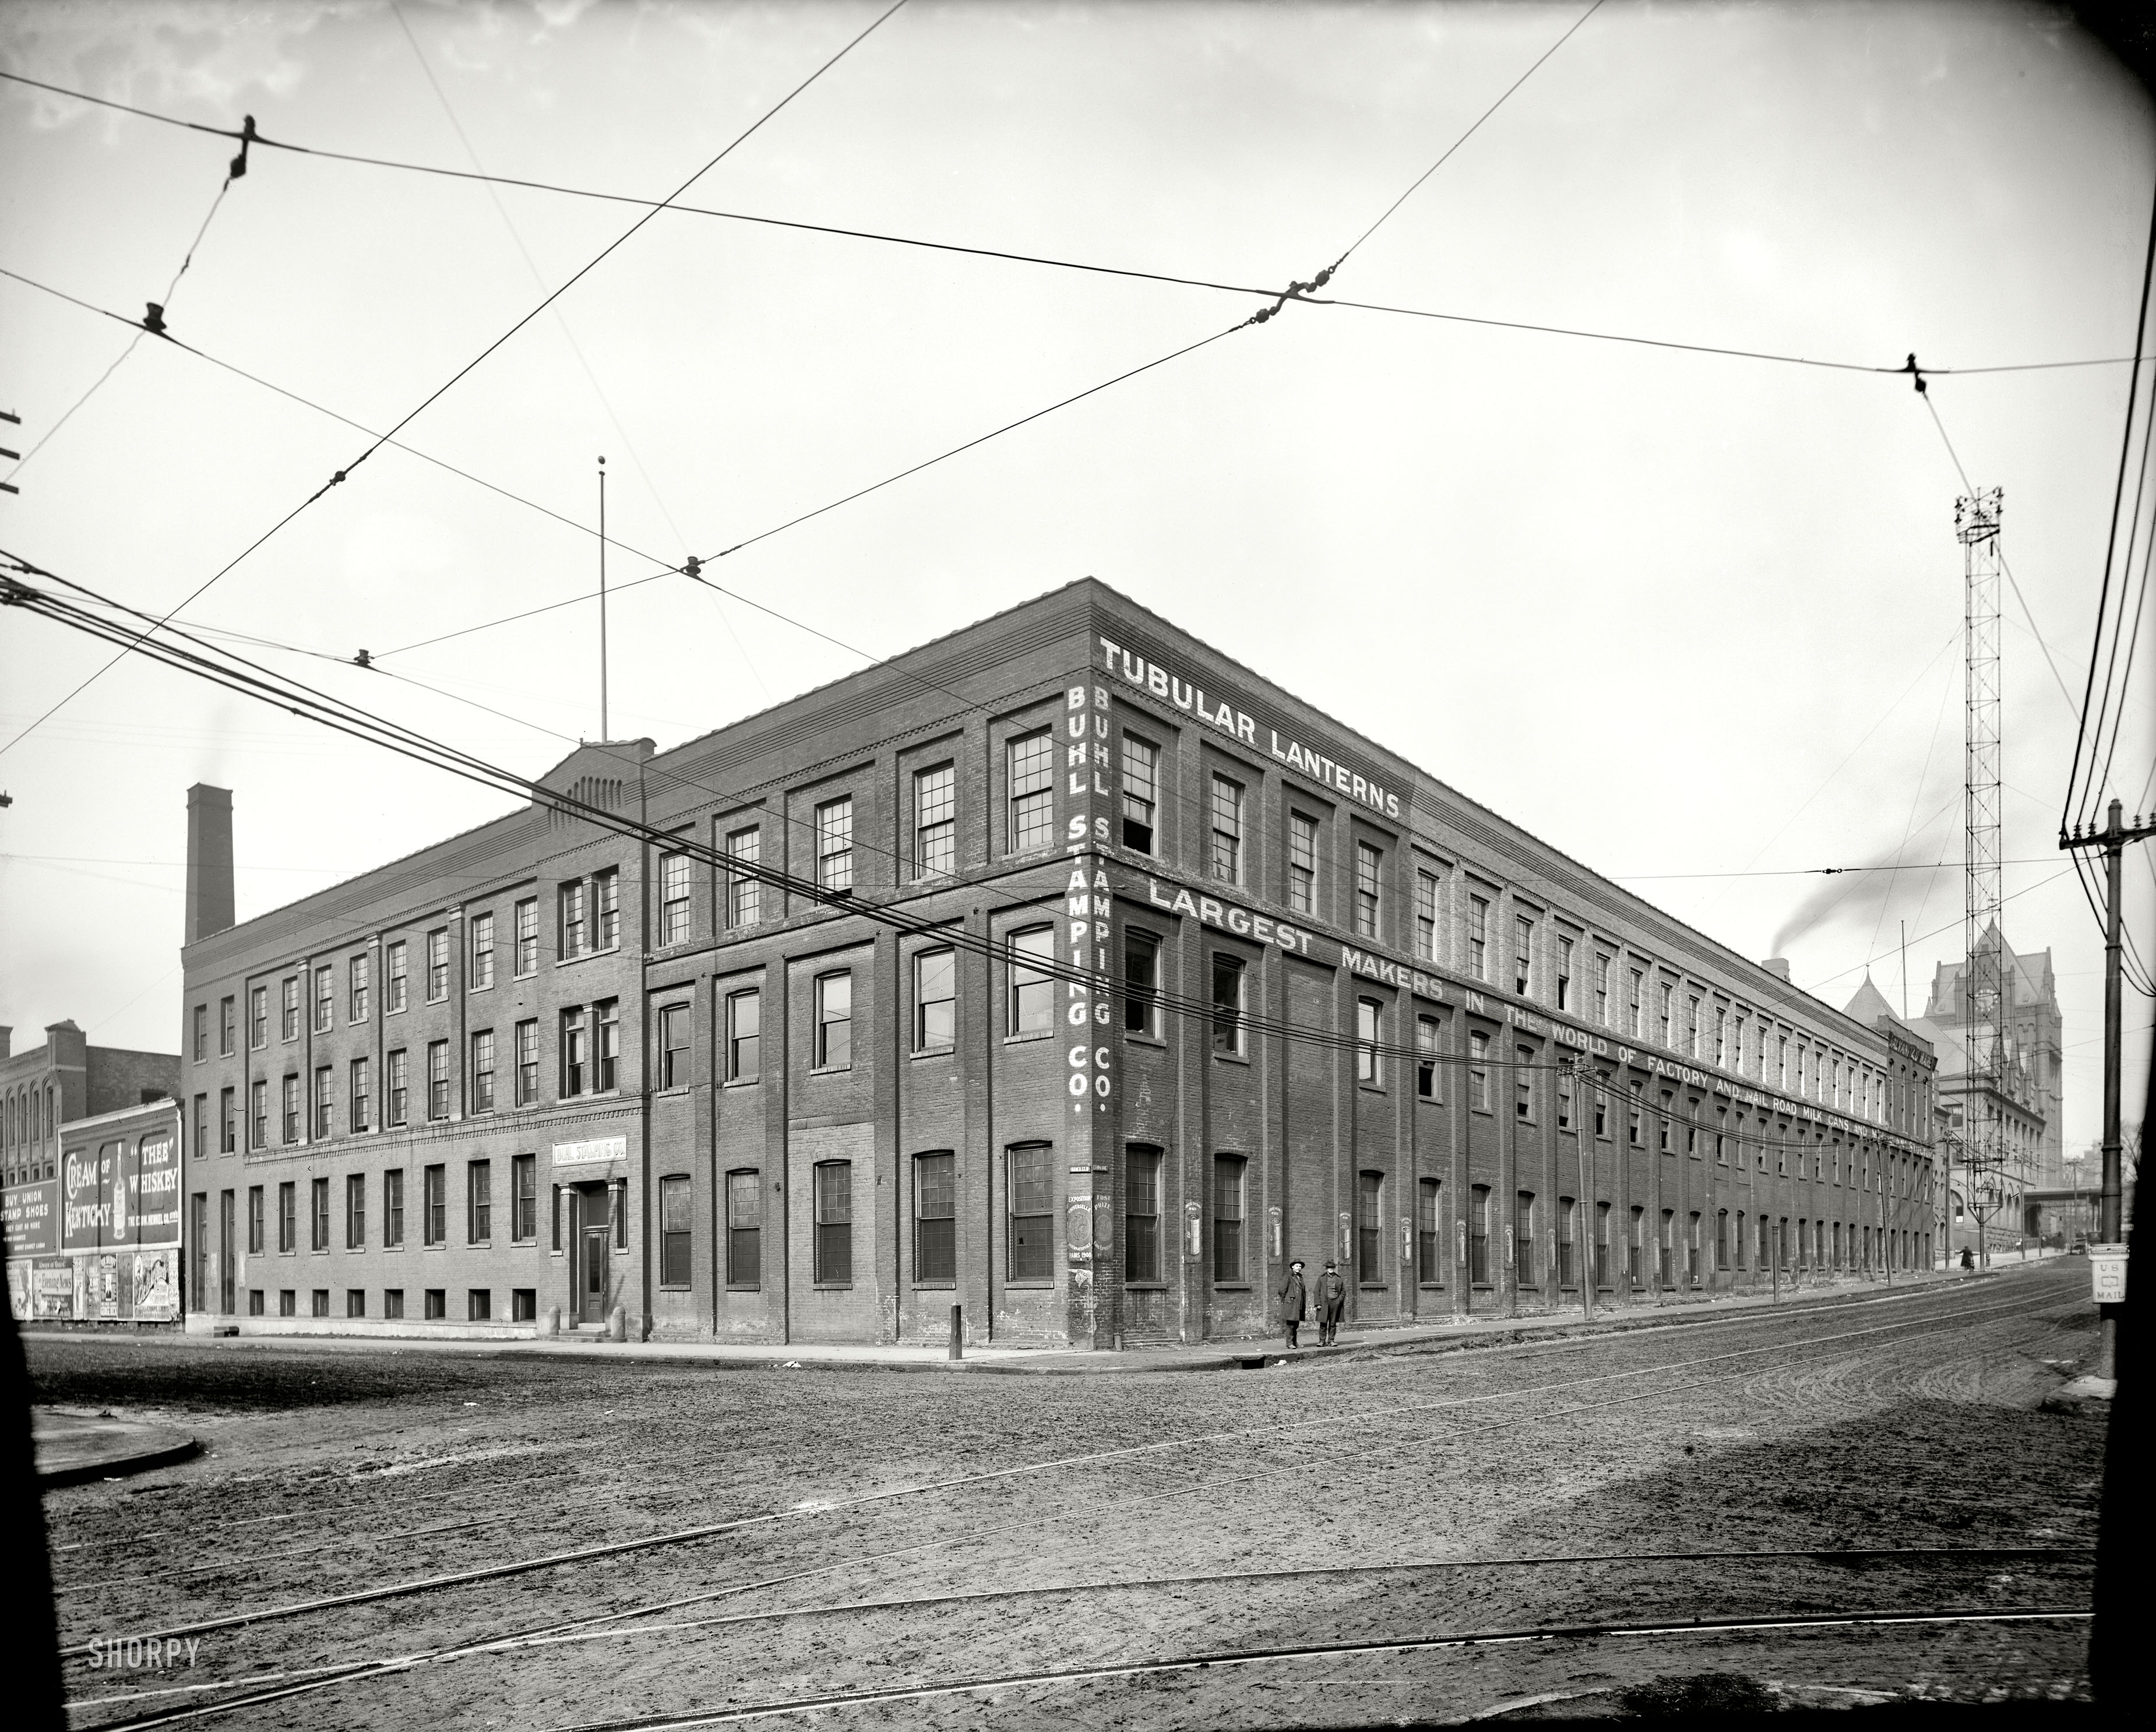 Detroit circa 1905. "Buhl Stamping Co., 3rd Ave. and Larned." Note the "Cheese Factory" milk cans illustrated between the windows, and the arc-lamp "moonlight tower" to the right. 8x10 glass negative, Detroit Publishing Co. View full size.